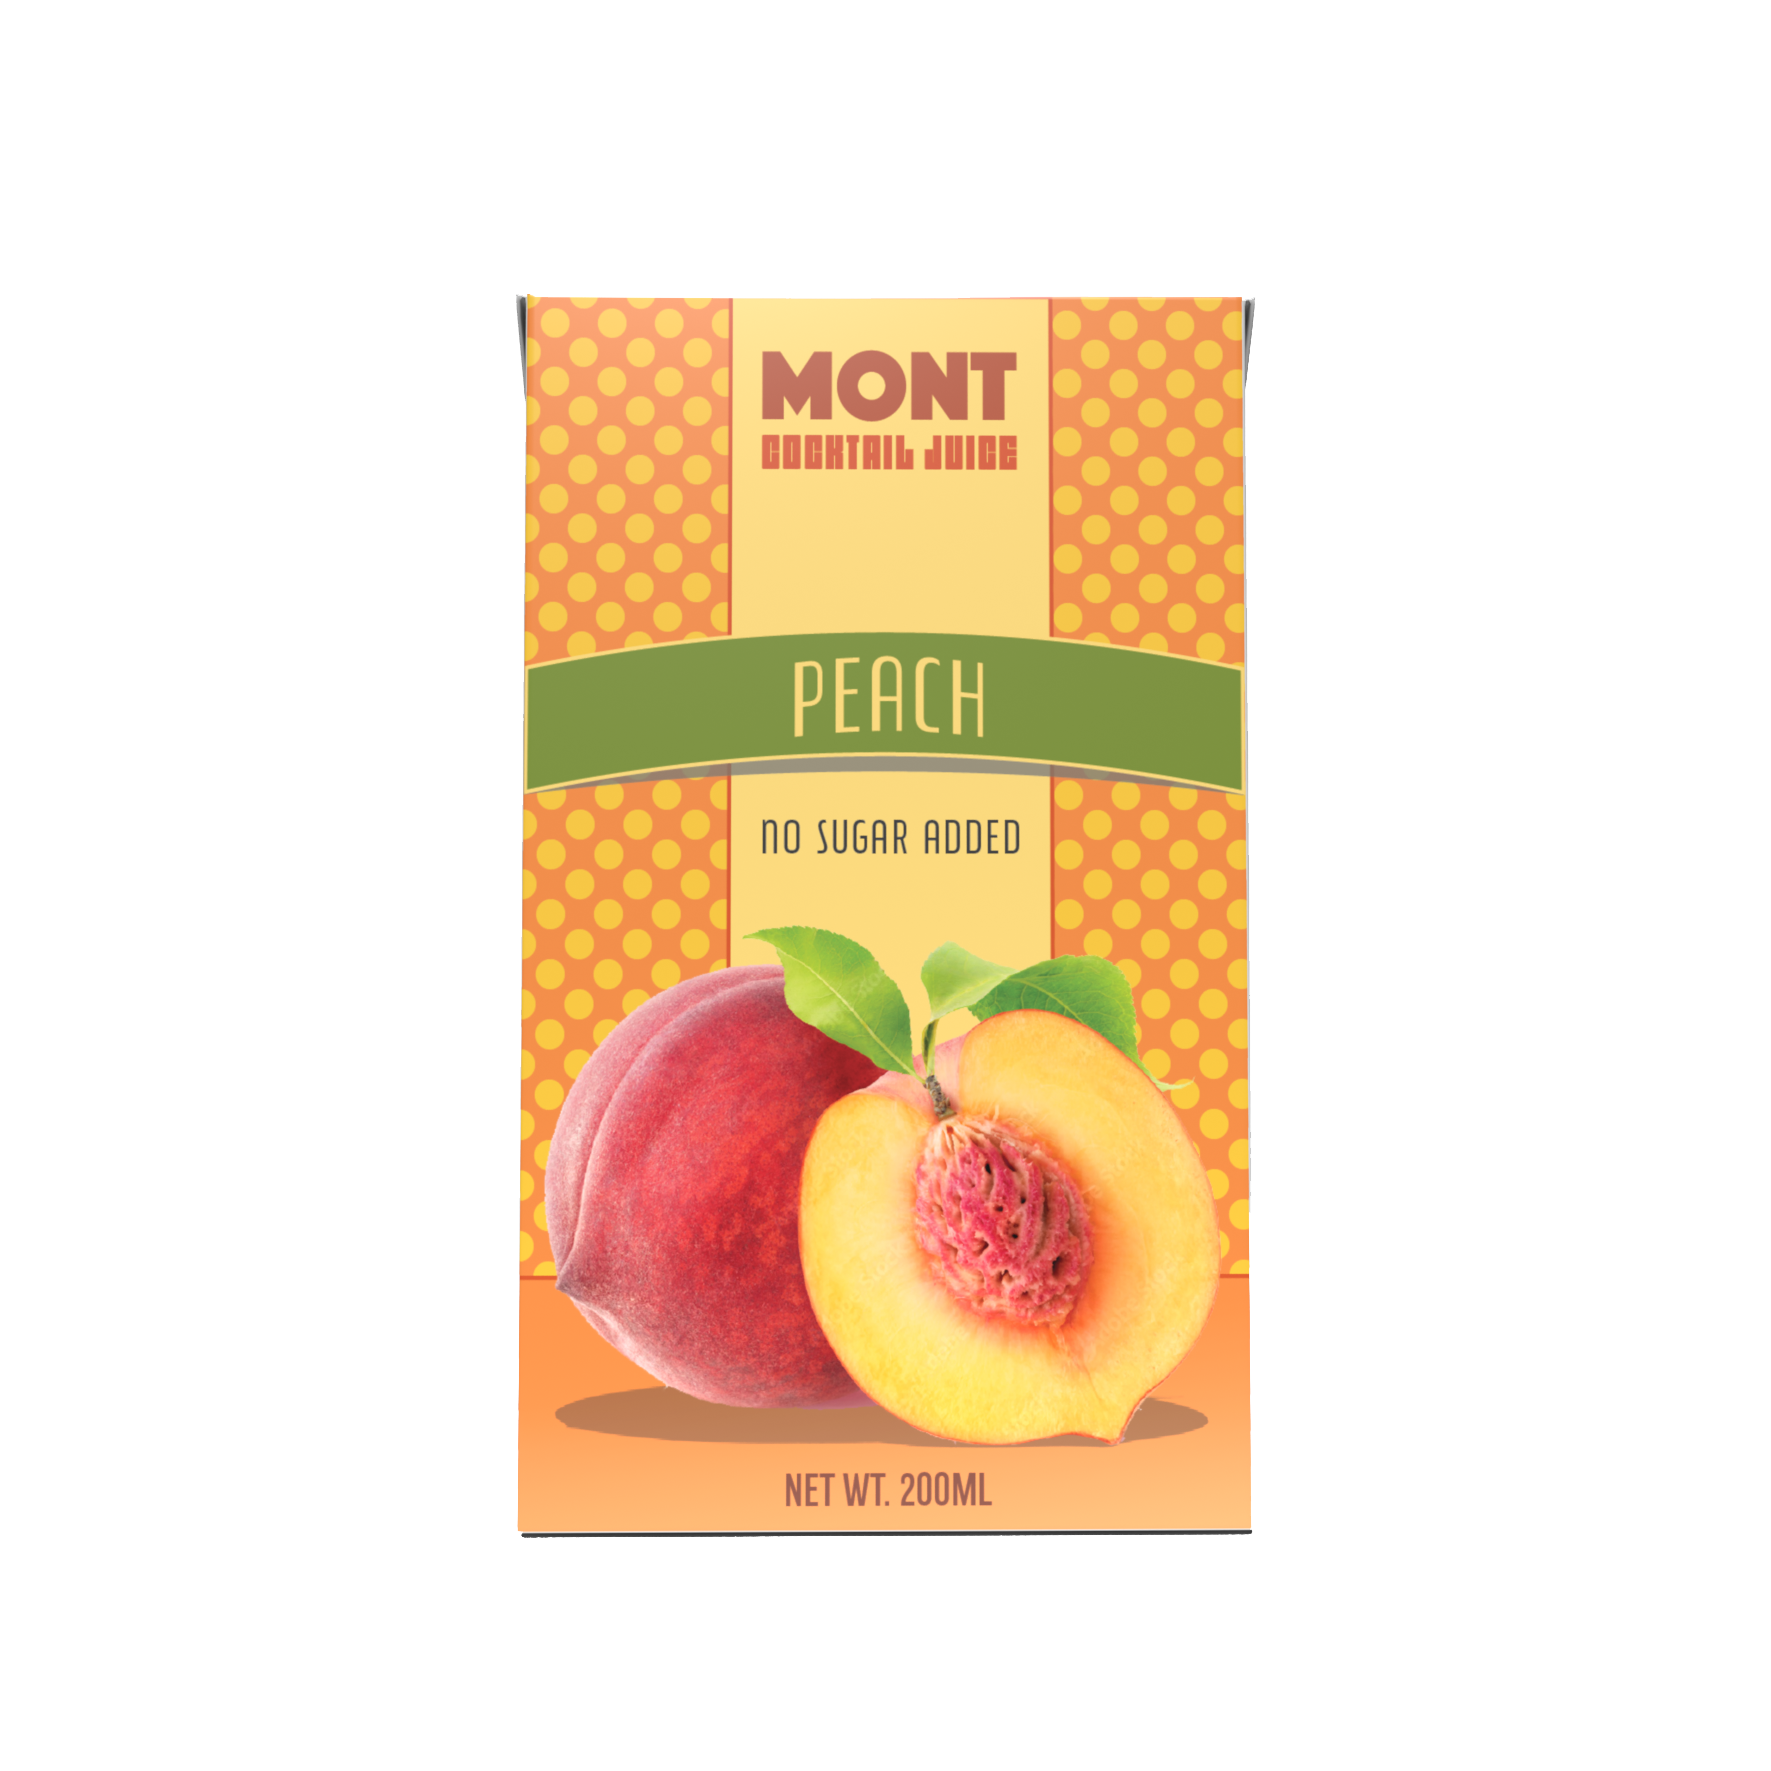 Packaging concept for peach cocktail juice